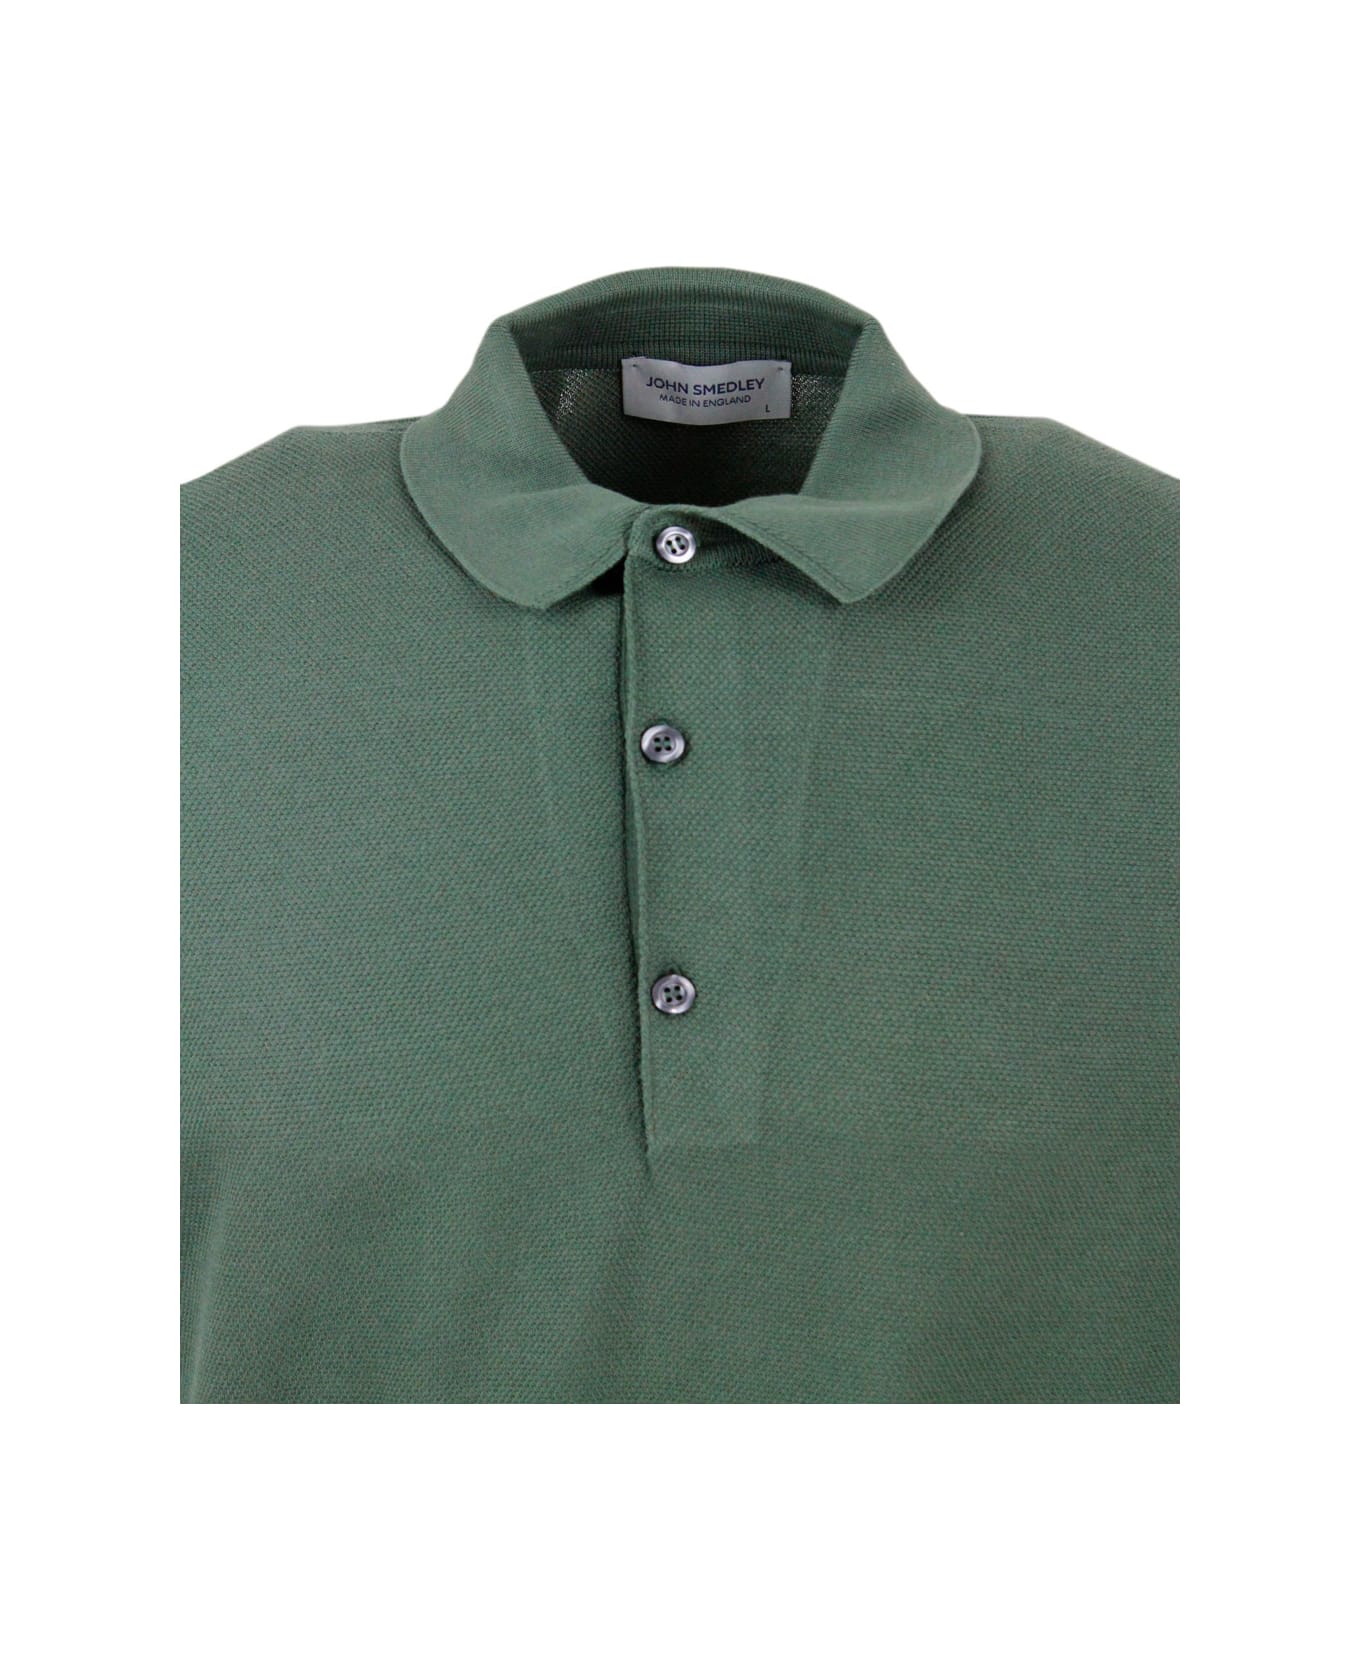 John Smedley Short-sleeved Sustainable Polo Shirt In Extrafine Piqué Cotton Thread With Three Buttons - Green